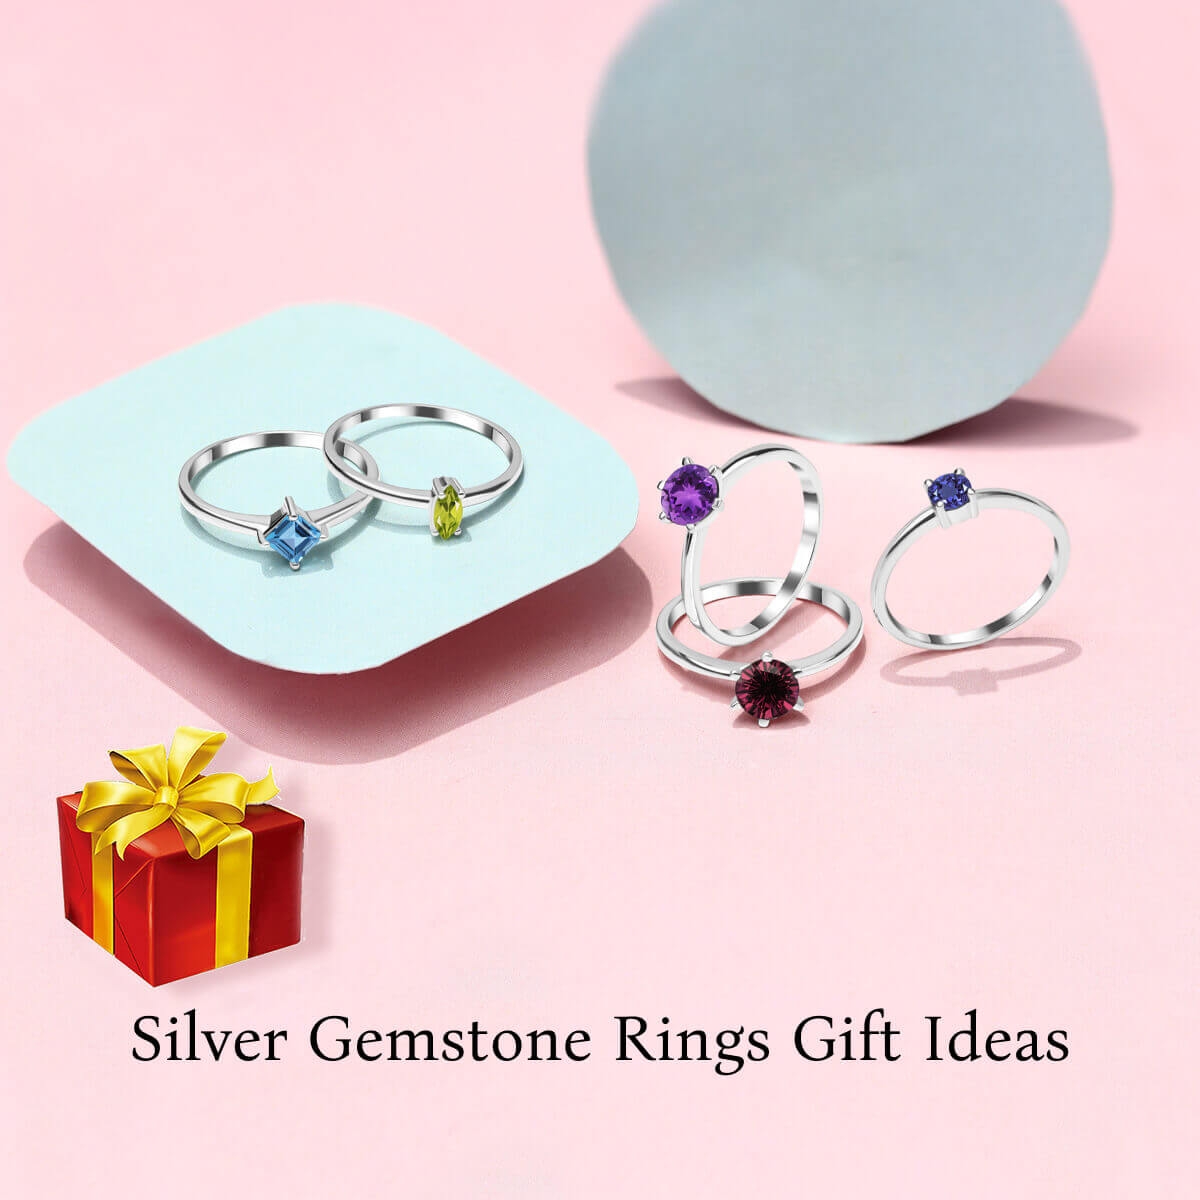 Hot Silver Gemstone ring Gifts